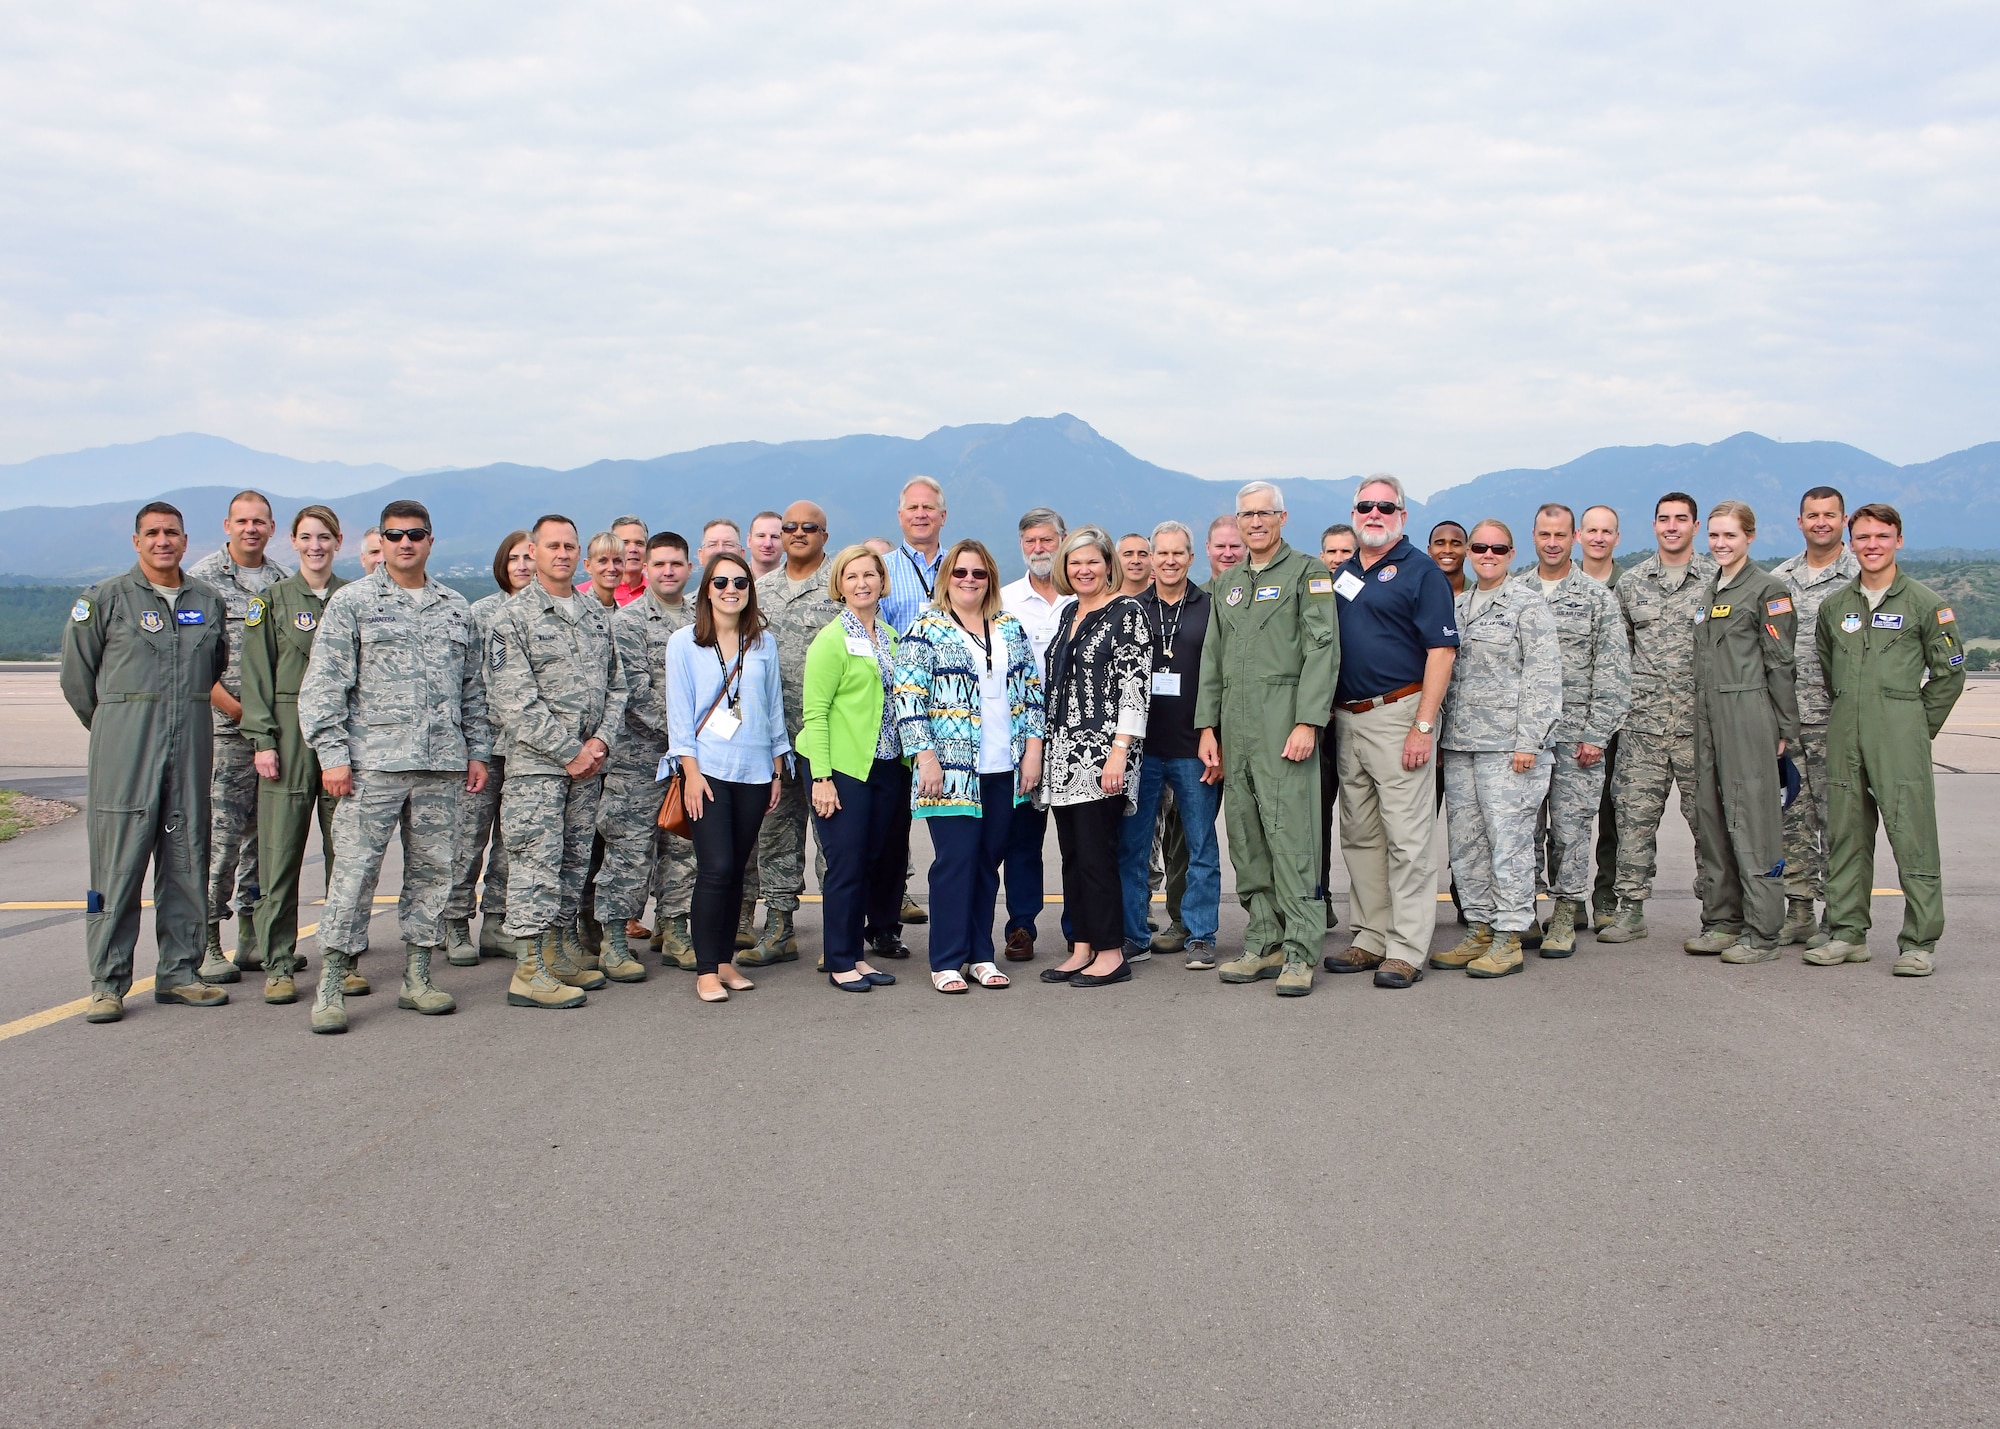 Participants in the 22nd Air Force Senior Leader Summit pose for a group photo by the U.S. Air Force Academy flightline Aug. 15, 2018. Military members and civilians embarked on a variety of tours to learn more about the Air Force as a whole, as well as the unique mission sets that make up the command. (U.S. Air Force photo/Staff Sgt. Andrew Park)